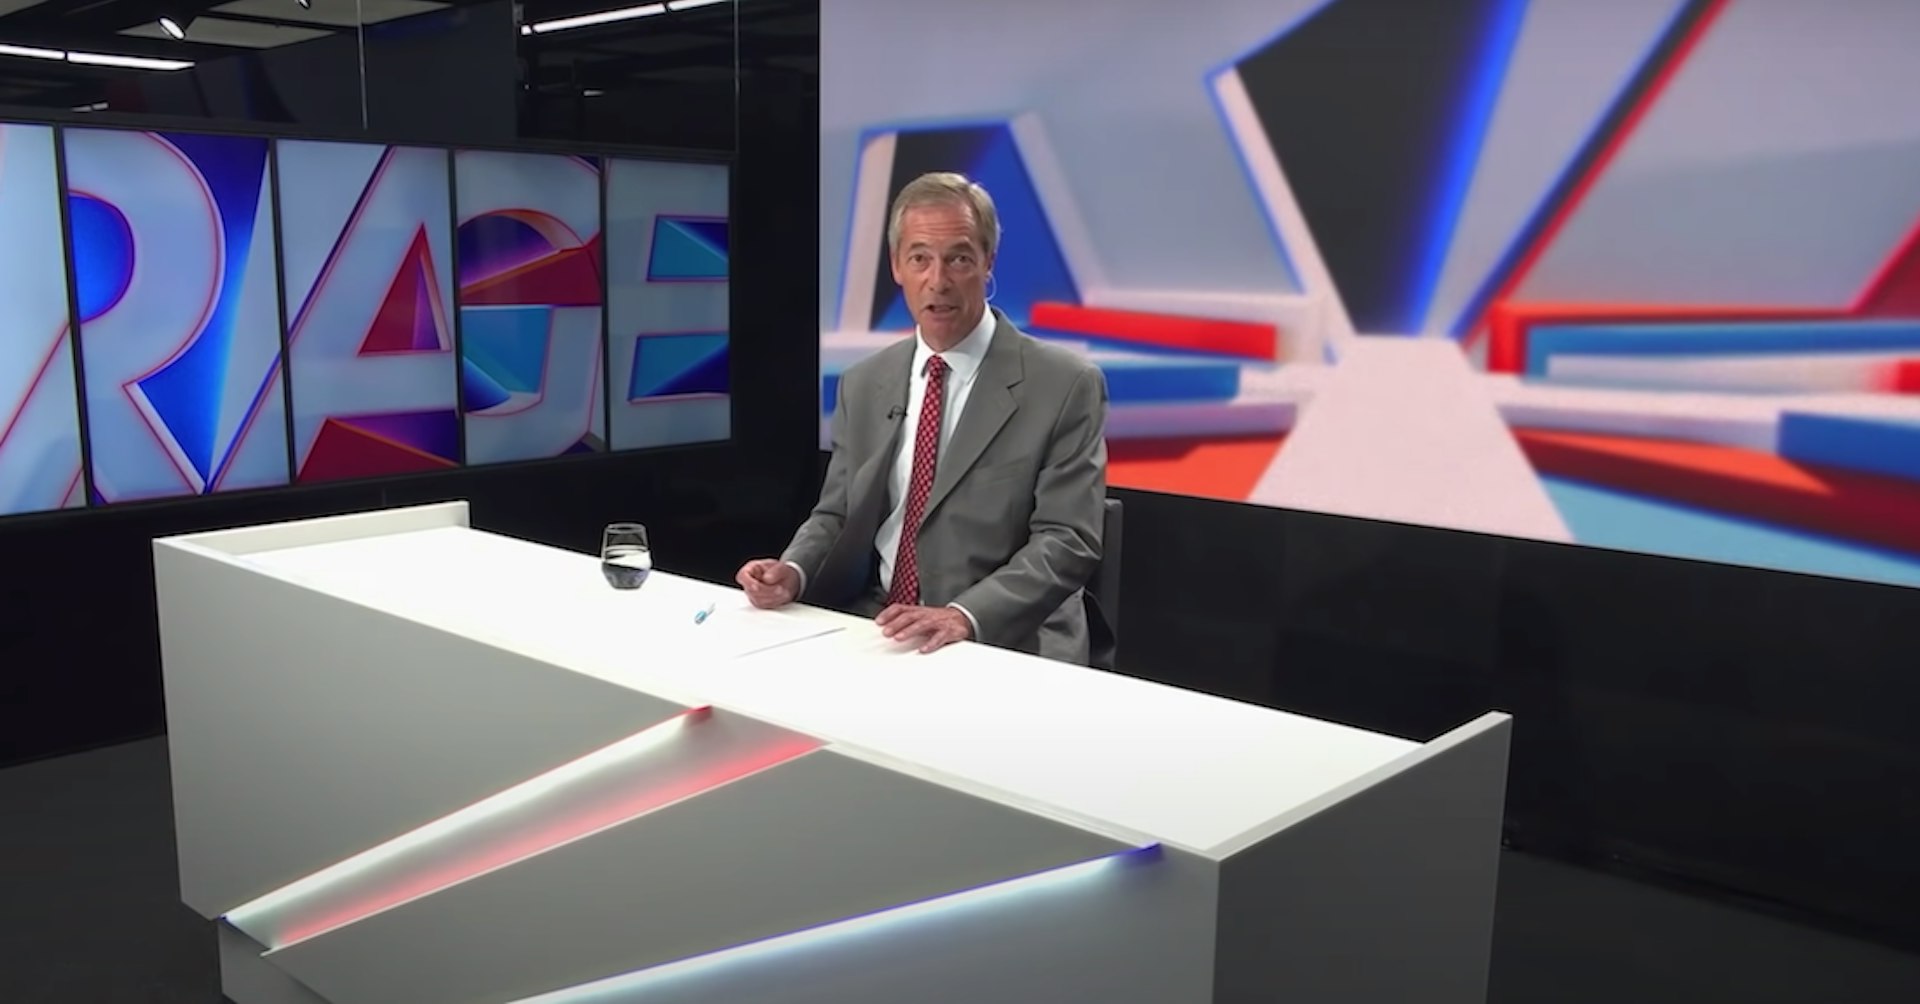 GB News: the rise of UK’s new rightwing media isn’t over yet